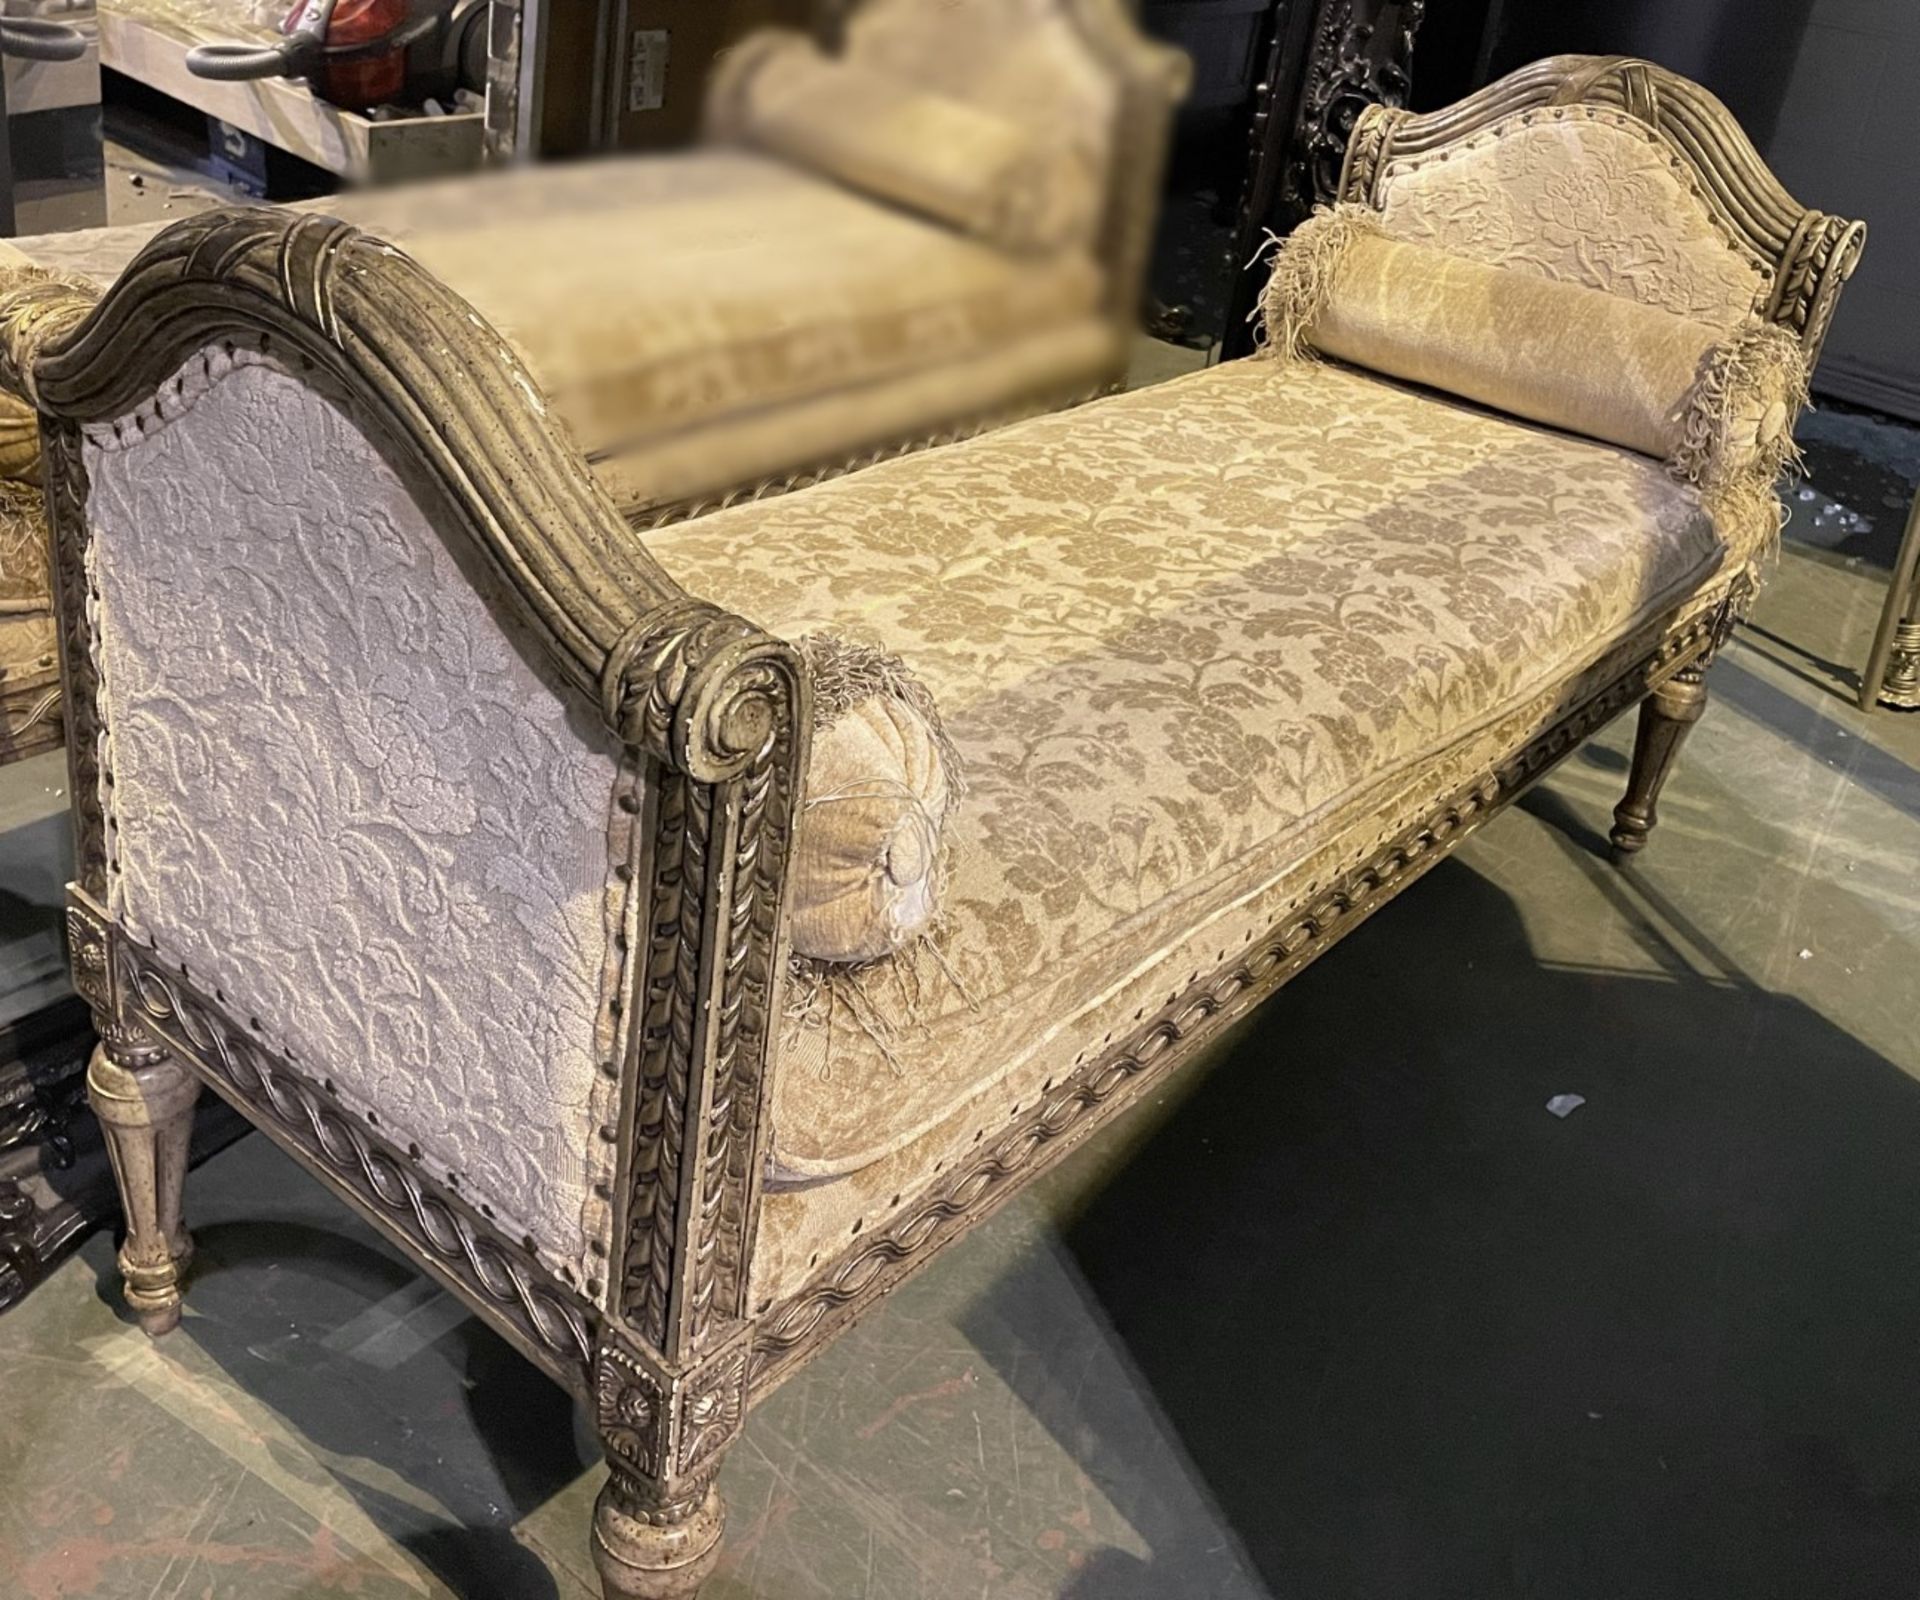 1 x Ornate And Beautifully Covered Chaise Longue With Roll Cushion - Approx 150X50X80Cm - Image 5 of 11